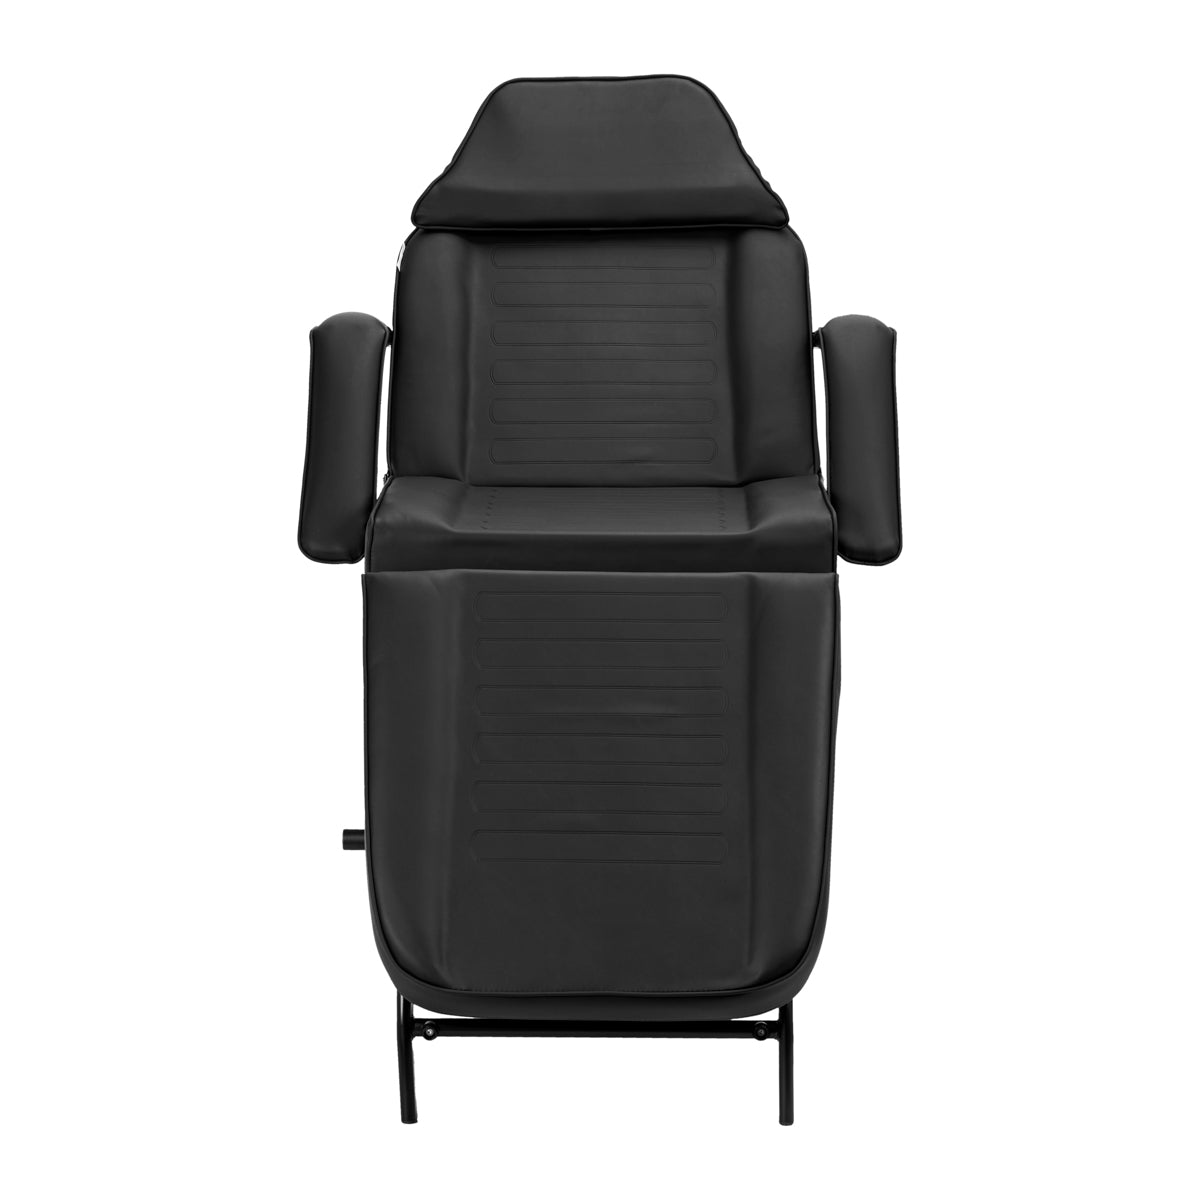 ActiveShop Cosmetic Chair 557A with Cuvettes Black